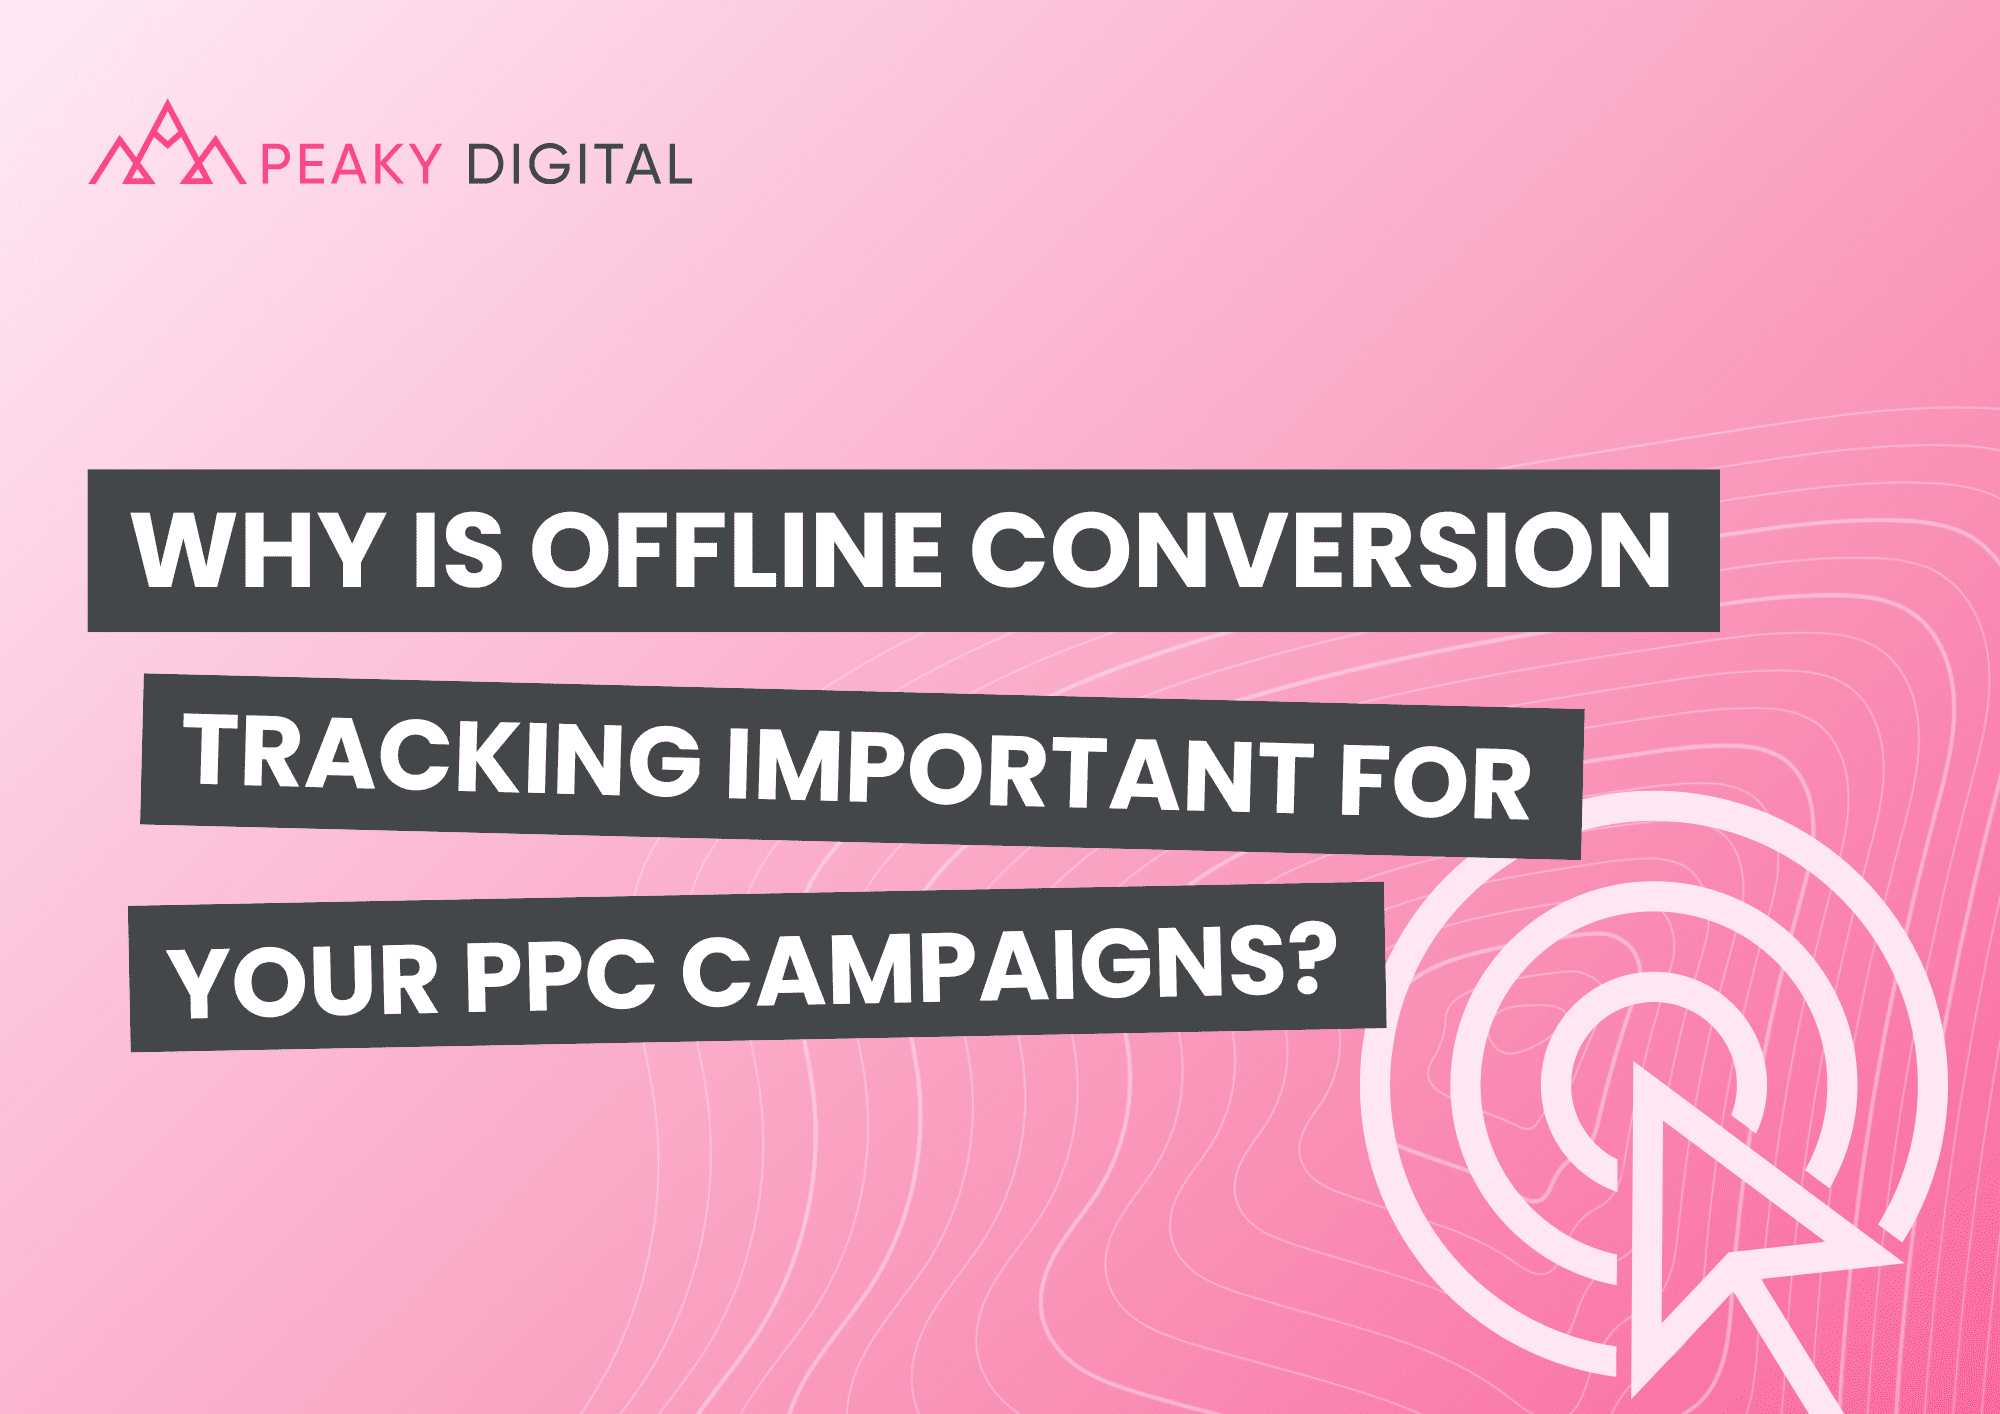 Why is Offline Conversion Tracking Important for your PPC Campaigns?